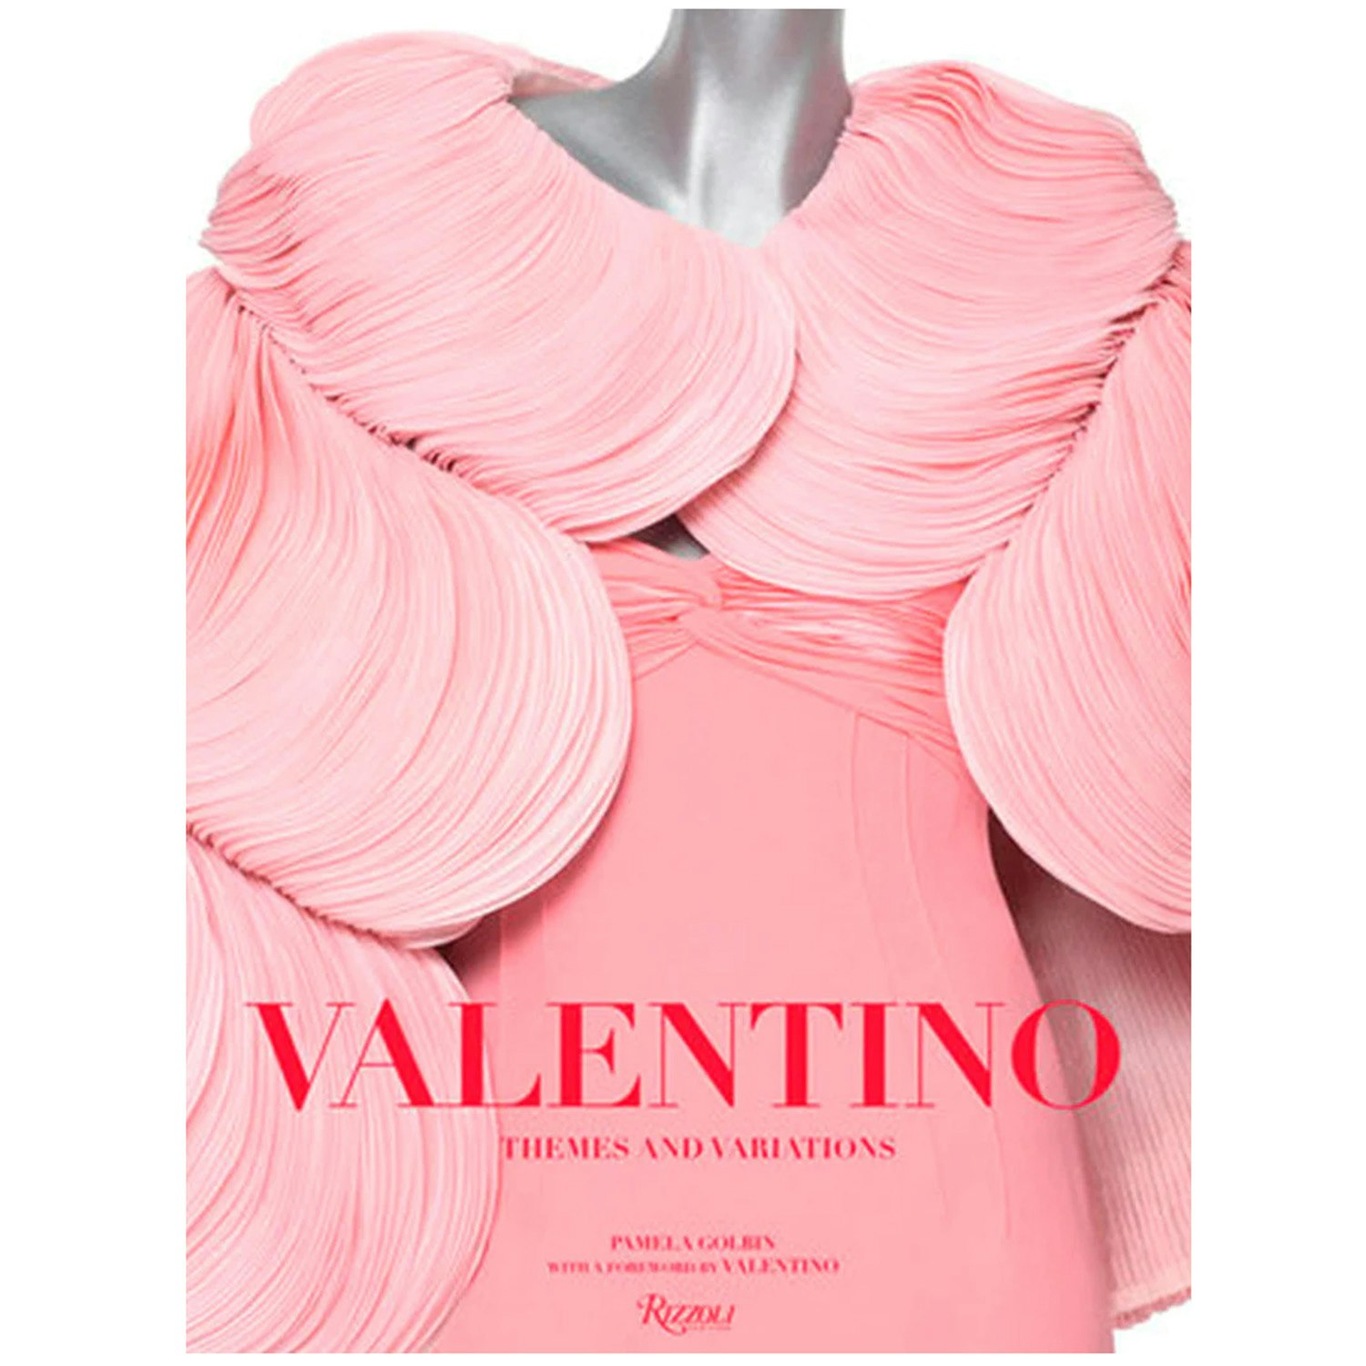 Valentino: Themes and Variations Buch